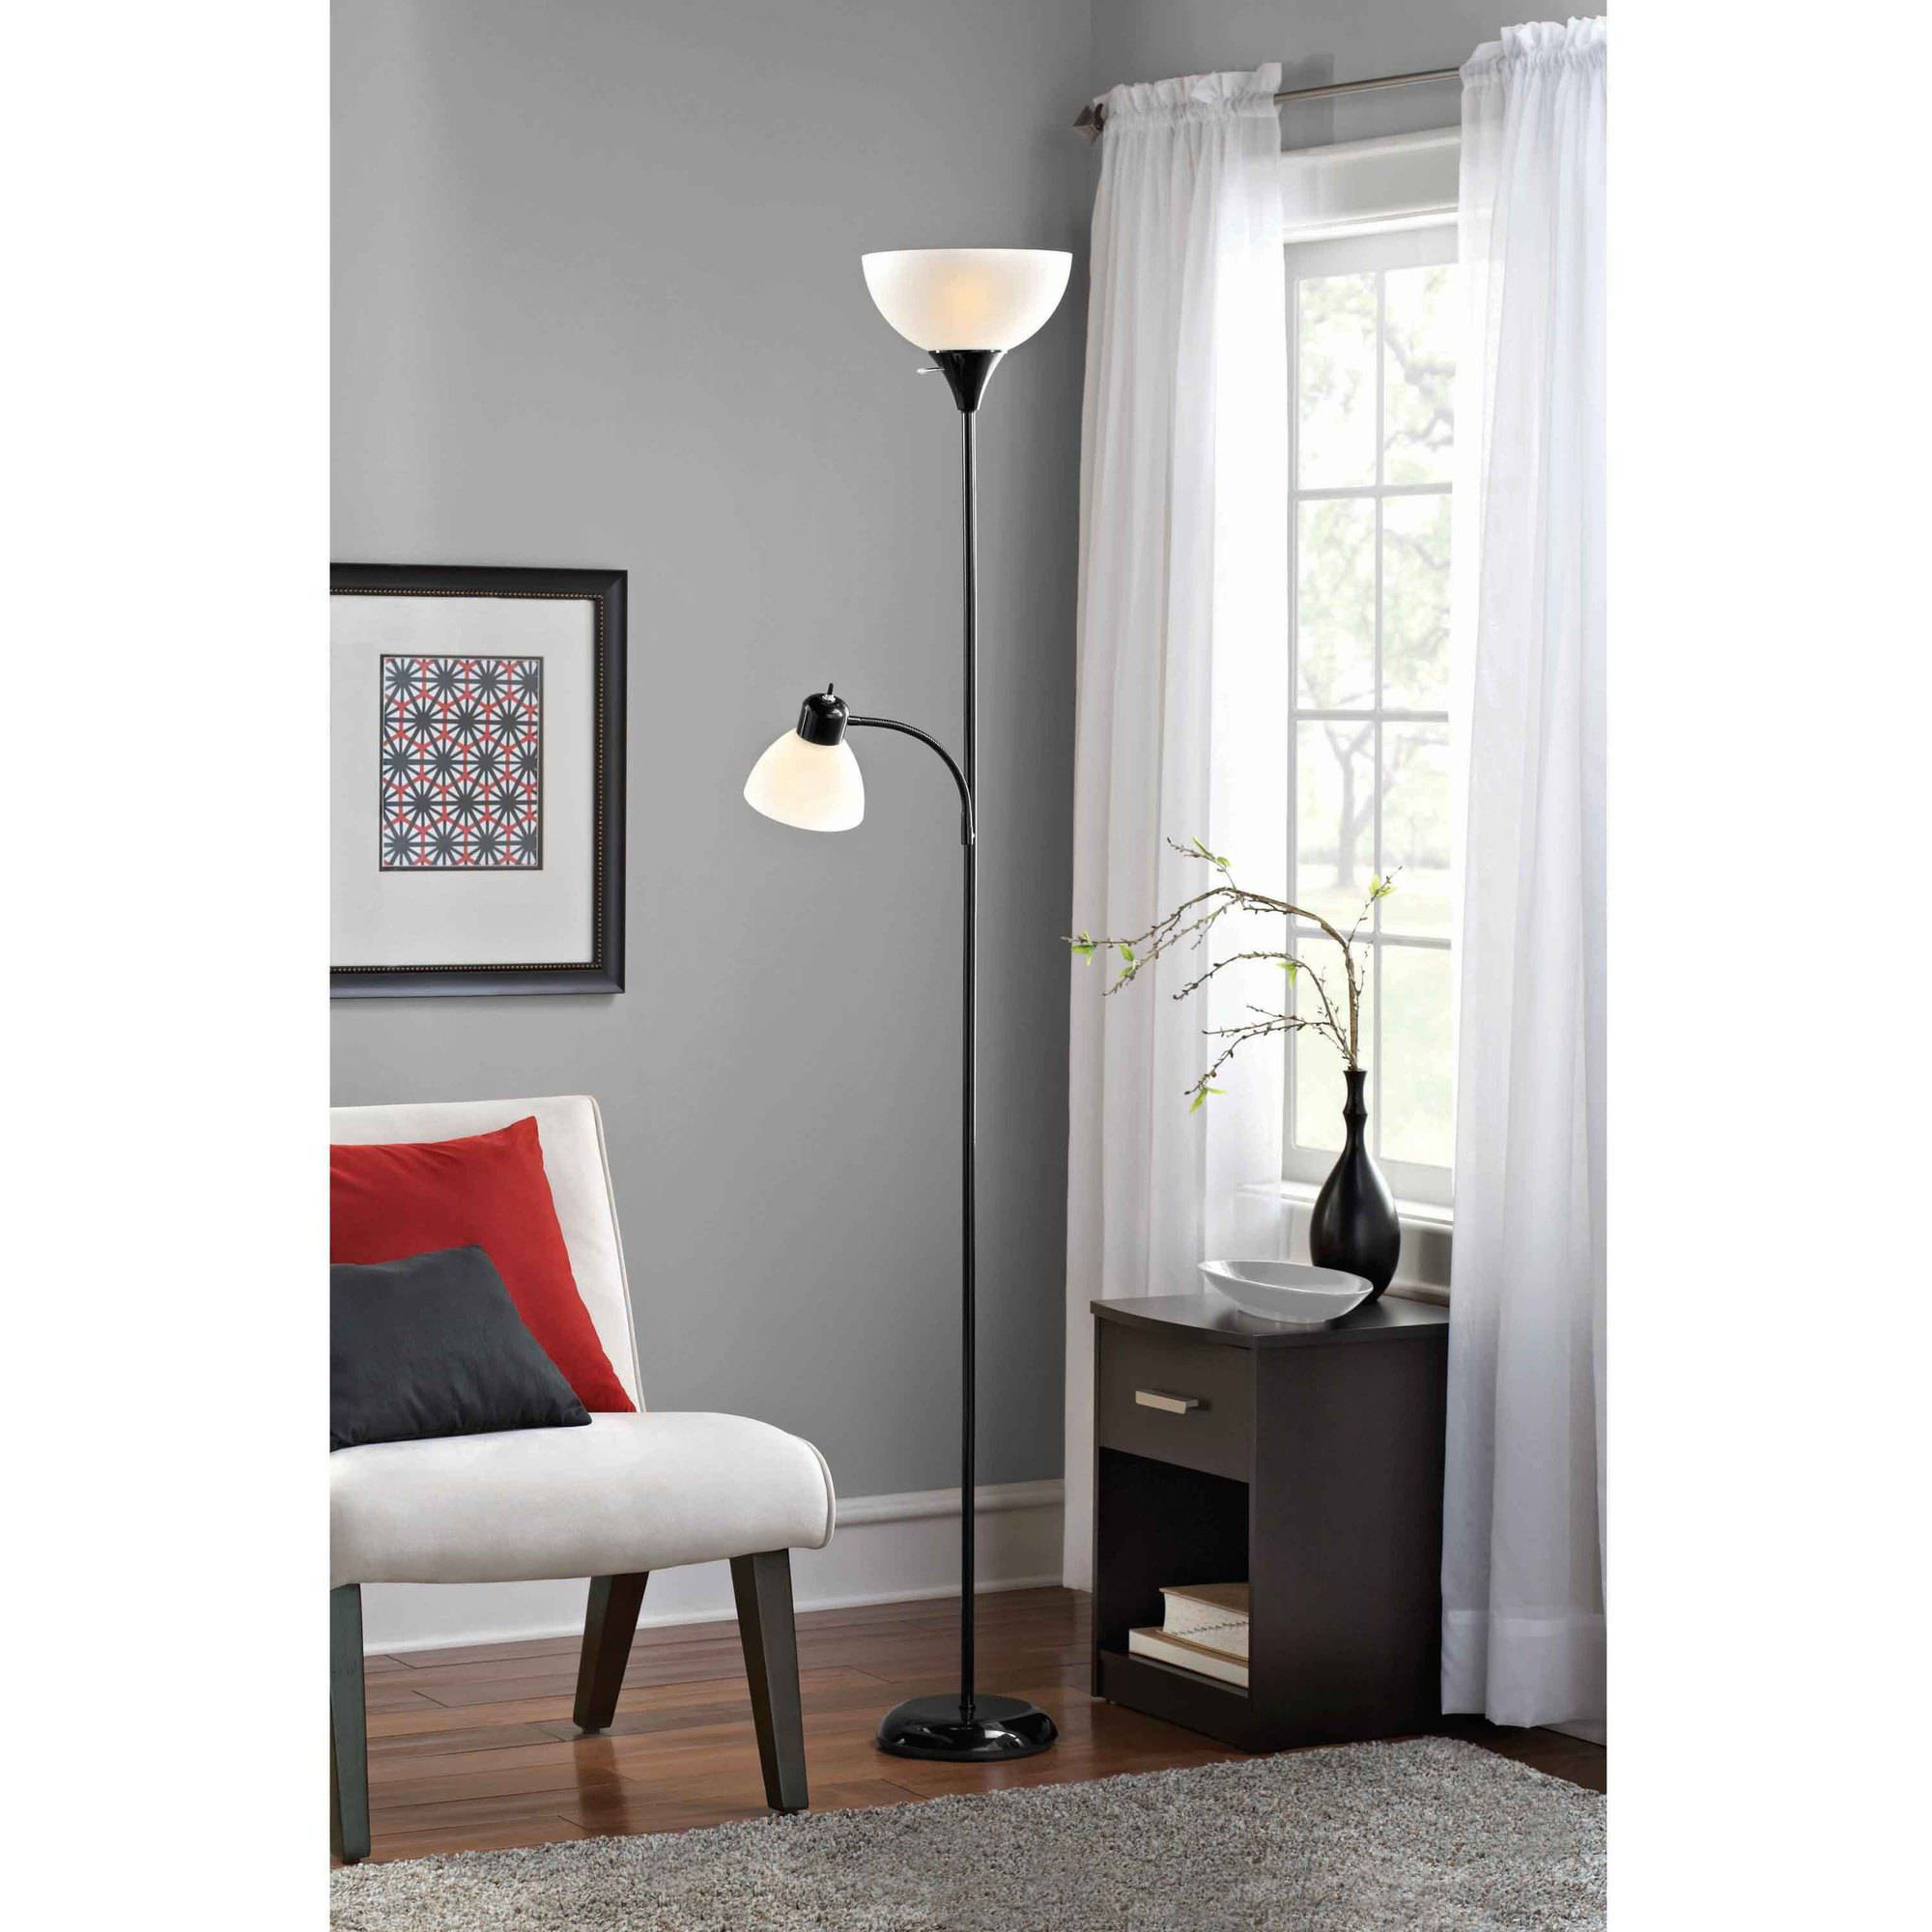 Mainstays Combo Floor Lamp With Bulbs Included Walmart pertaining to measurements 2000 X 2000